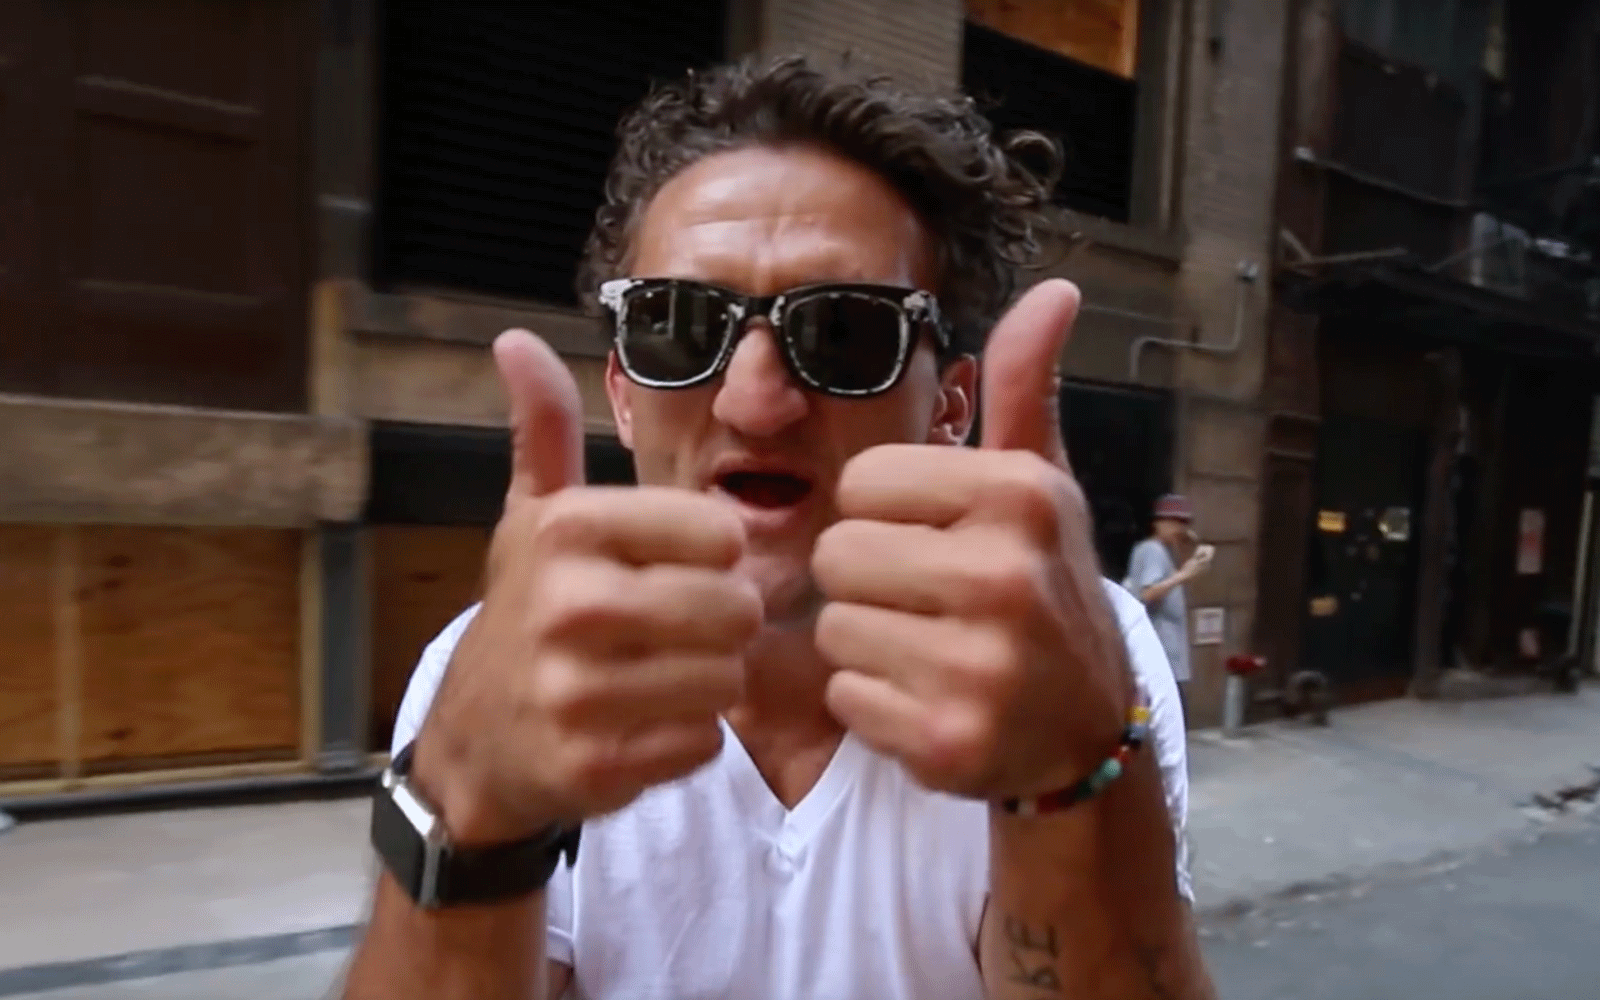 Casey Neistat, FunForLouis, Scott DW and other famous rs